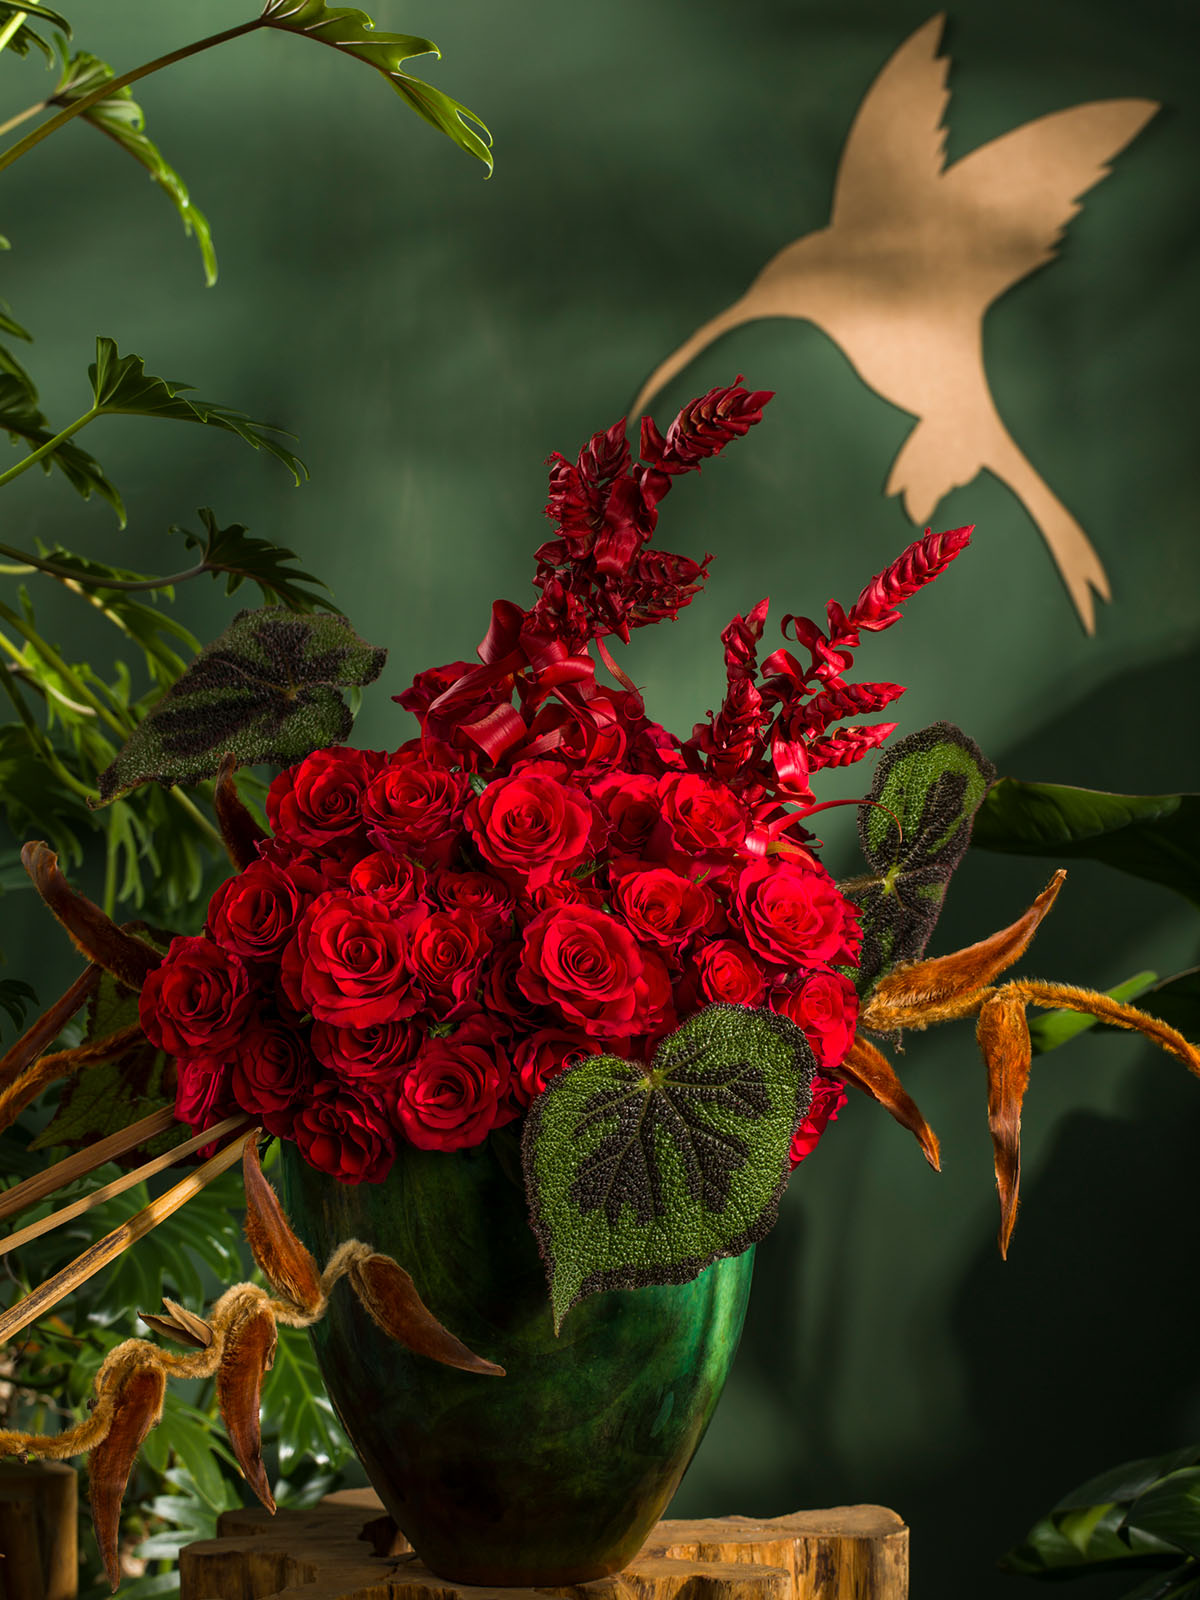 These Are the Most Beautiful Red Roses for Christmas016